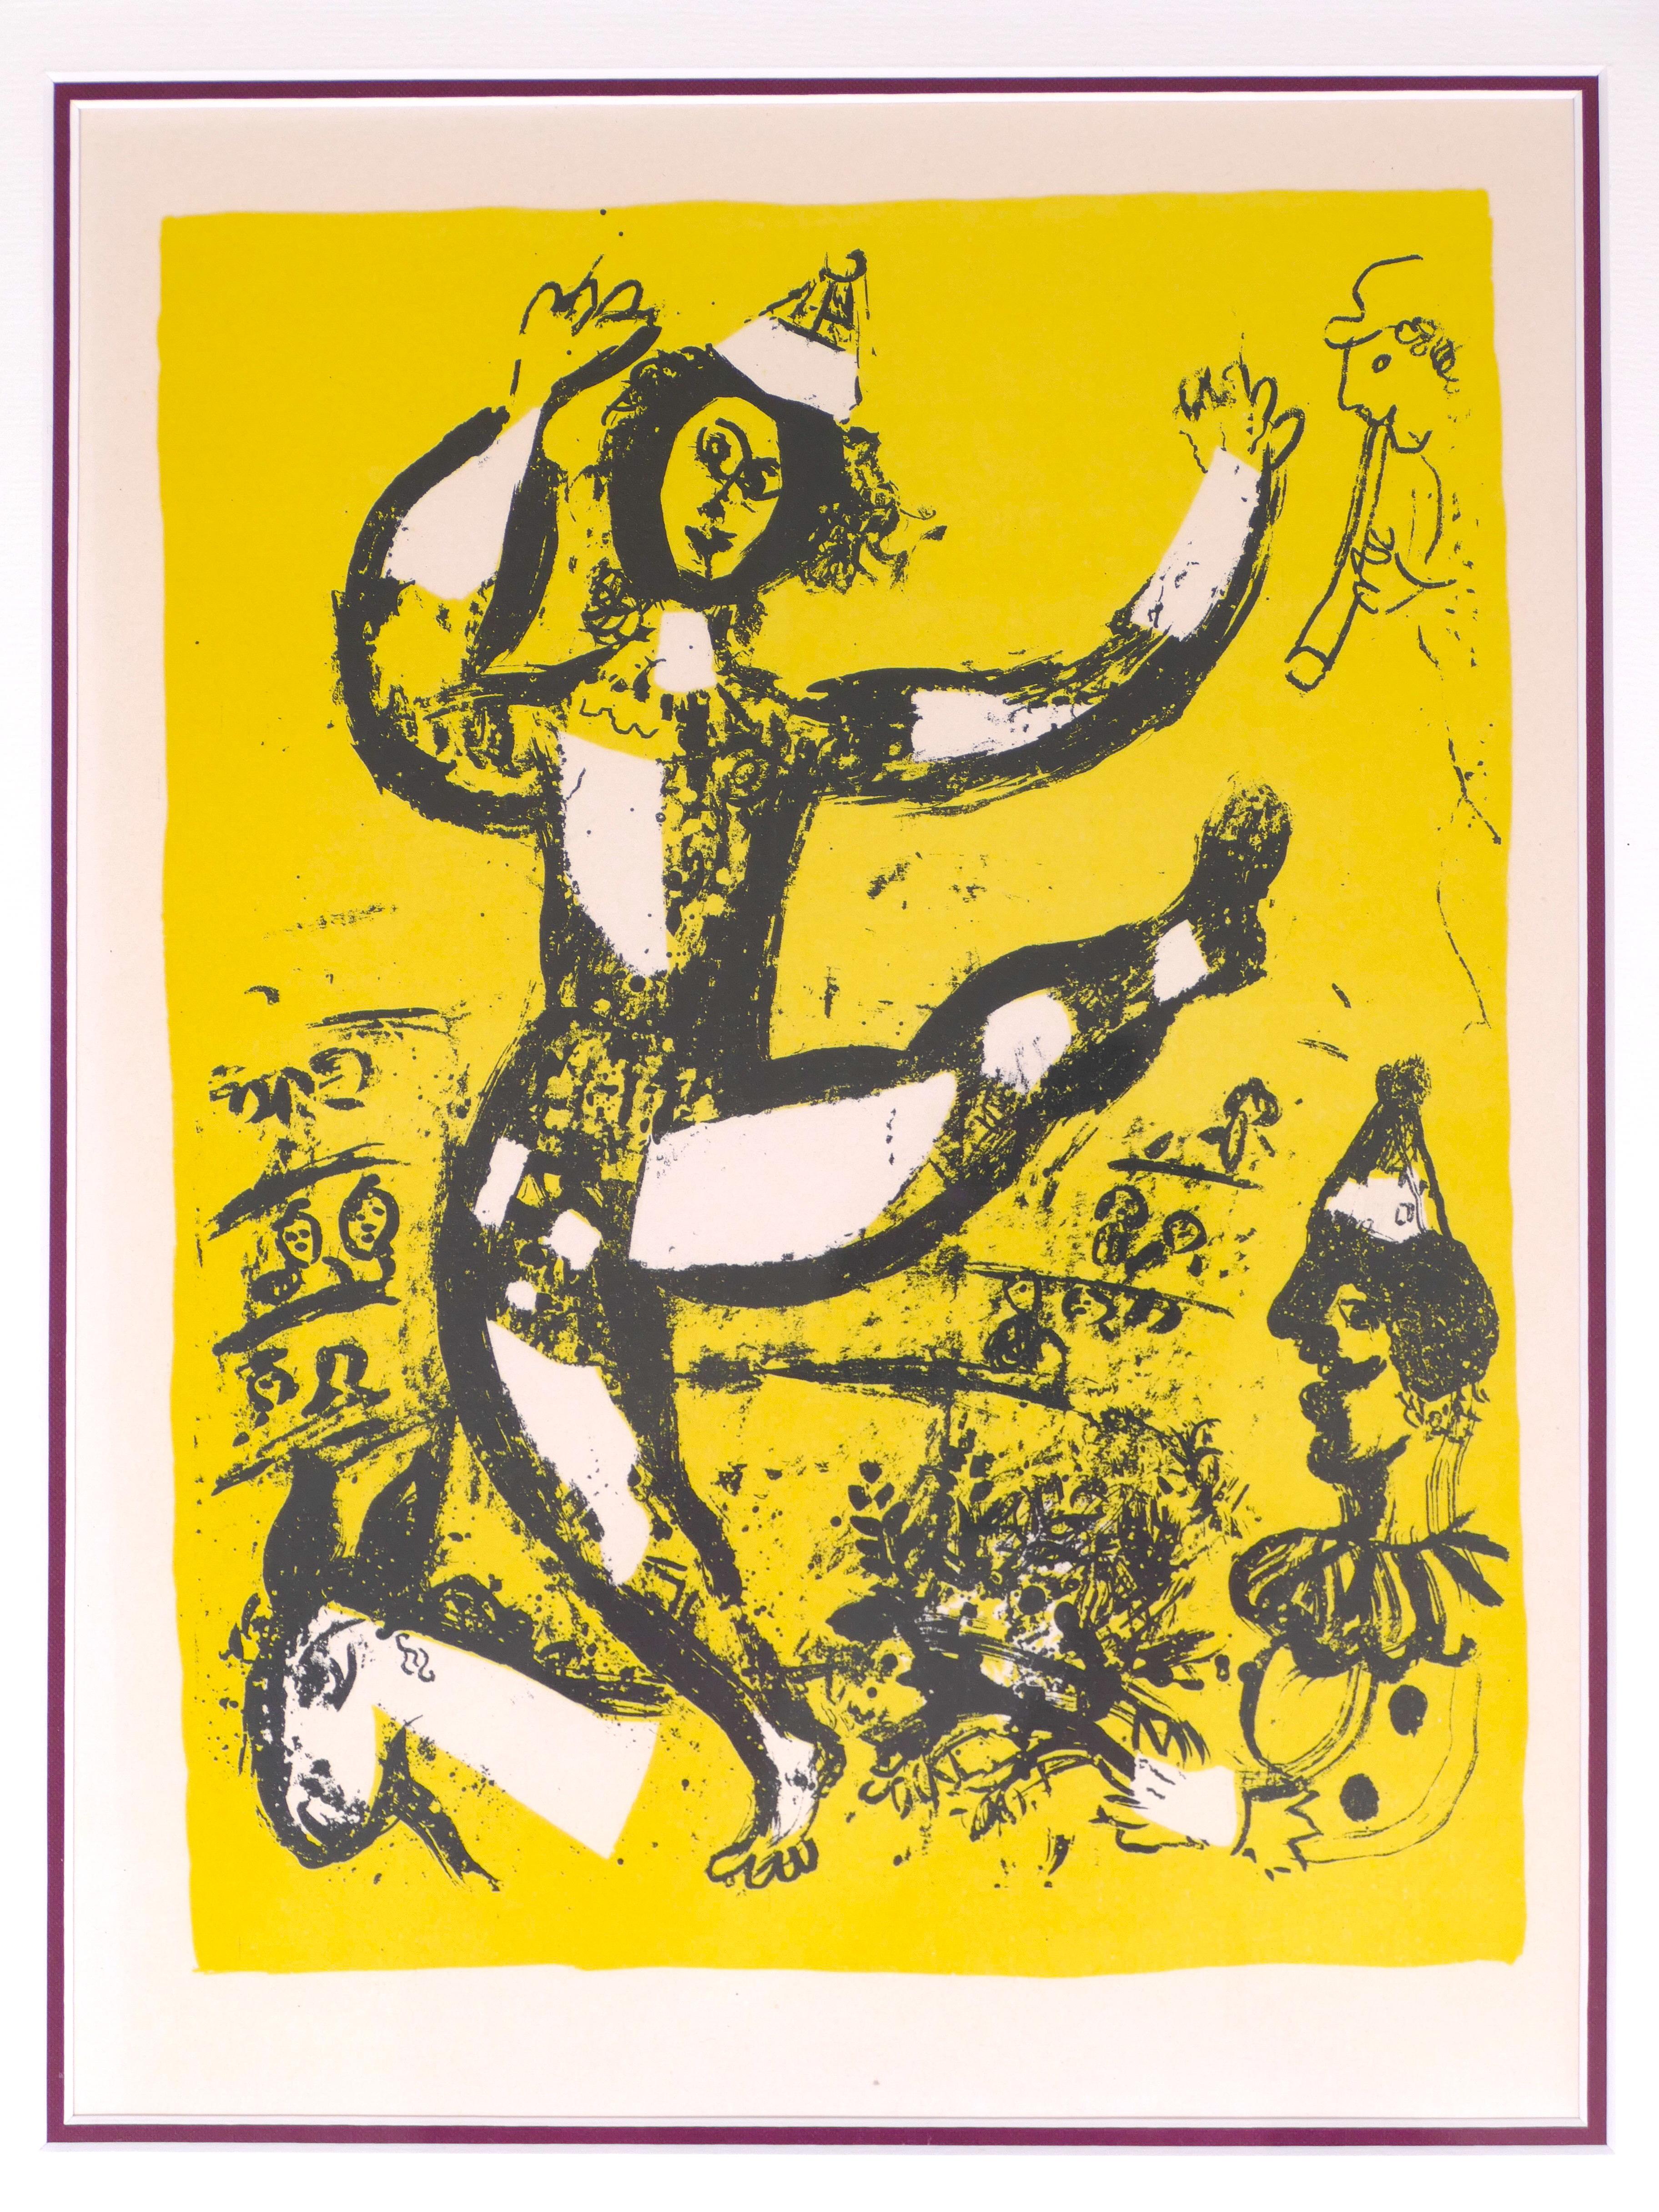 Le Cirque is a contemporary artwork realized by the Surrealist painter Marc Chagall (Vitebsk, 1887 – Saint-Paul-de-Vence, 1985) in 1960. Unsigned as issued, edition not available.

Original limited edition lithograph created by M. Chagall for